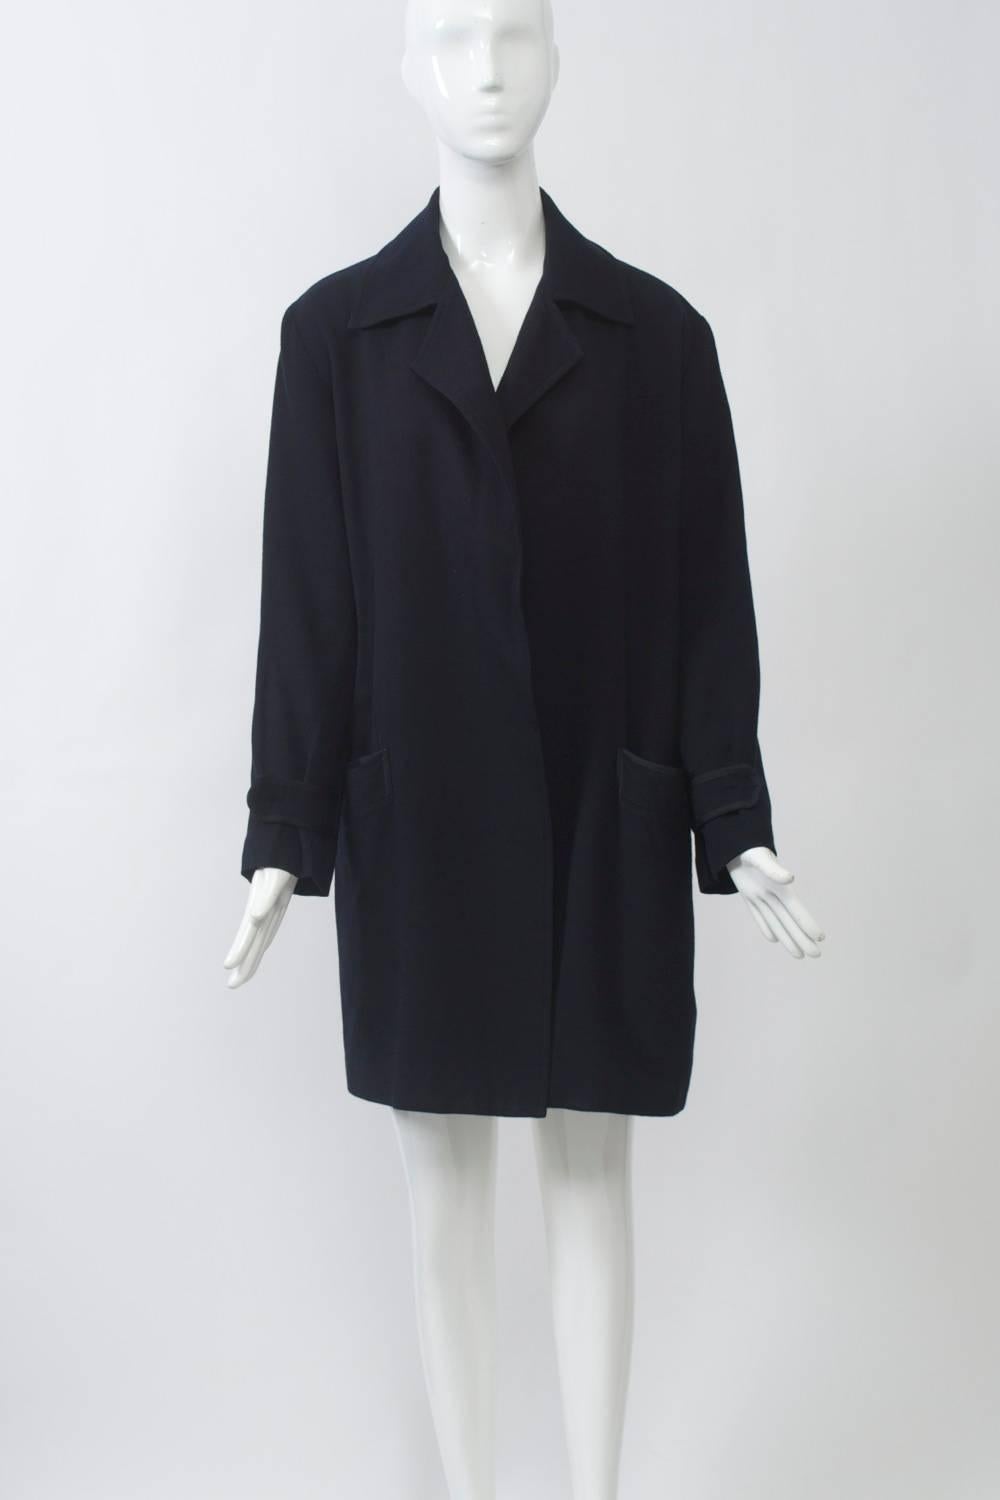 Long jacket in soft navy gabardine that feels like cashmere (the contents label is worn). Notched collar, loose fit, with flat braided trim on pockets and wrist tabs. Yoke back with deep inverted pleat. No closures. Size S-M.